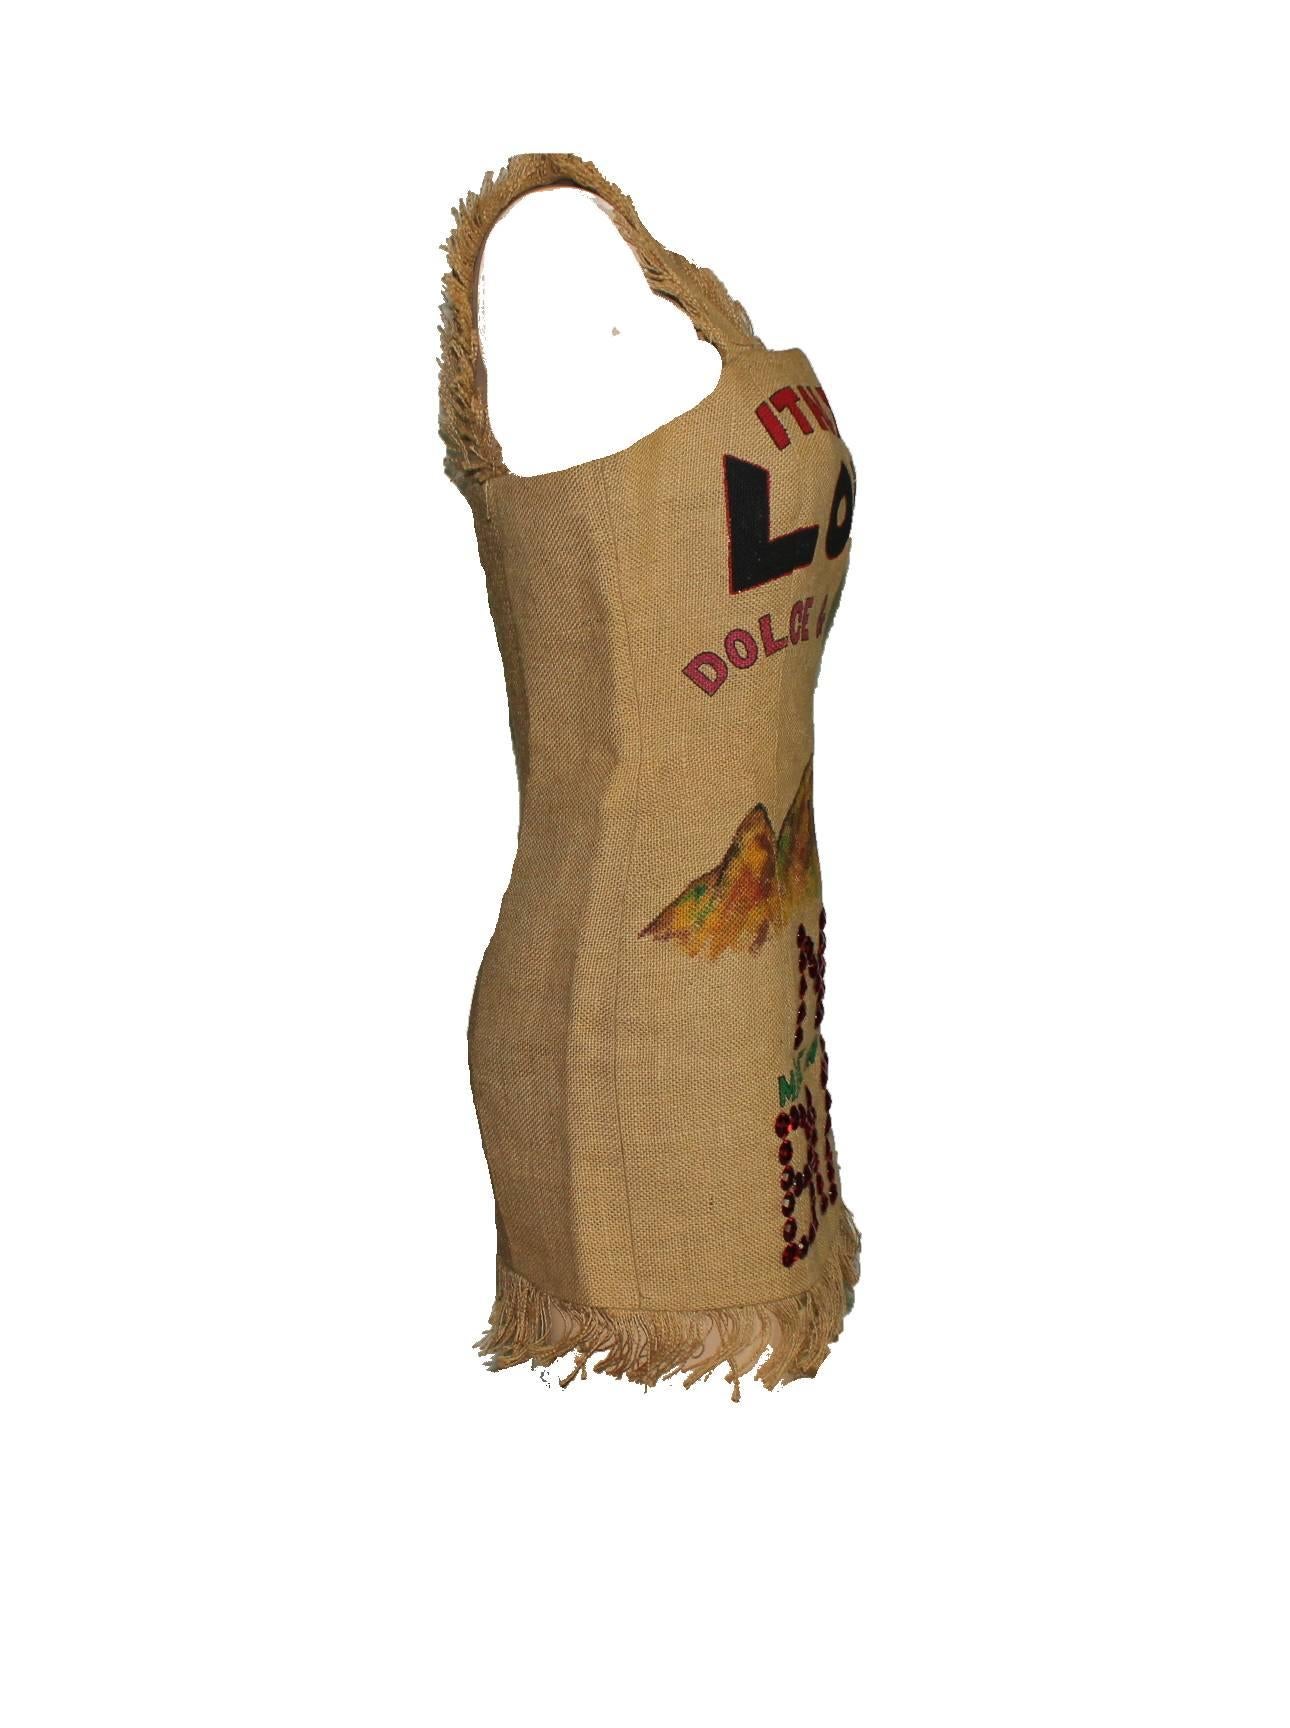 UNIQUE PIECE

COLLECTOR´S

DOLCE & GABBANA

PRINTED SACK DRESS

FROM THE FAMOUS SPRING SUMMER 1992 COLLECTION 